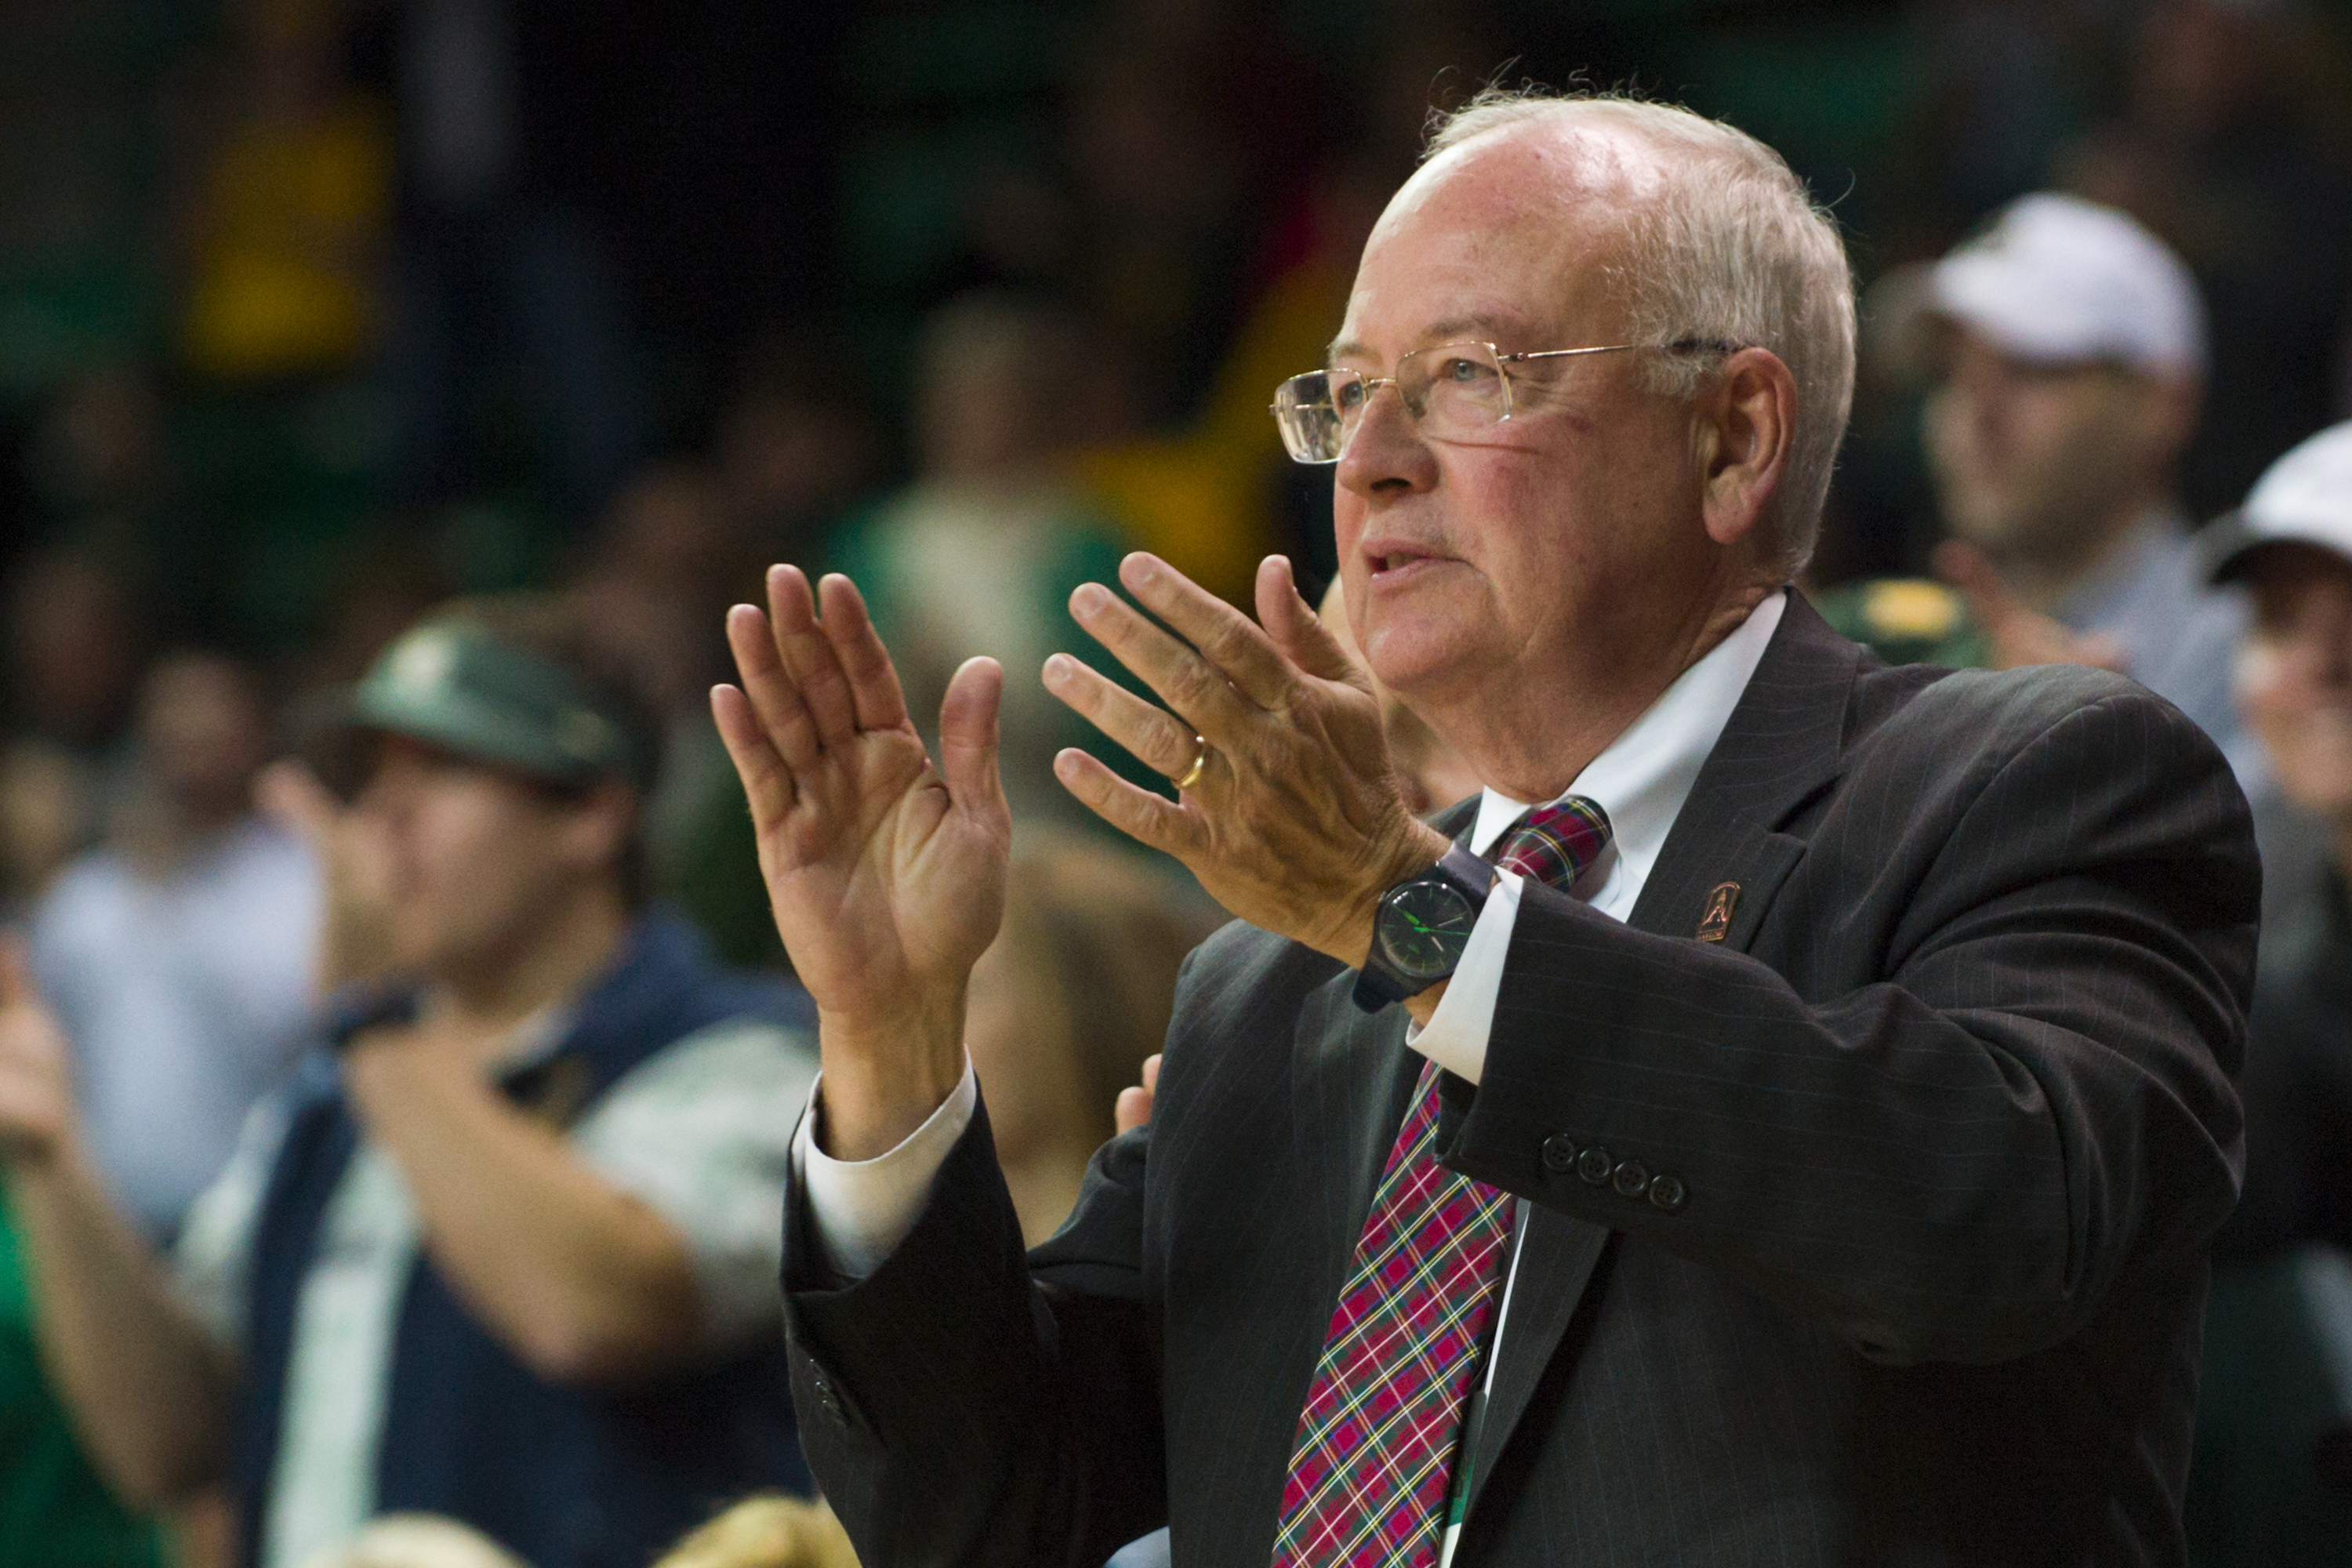 Baylor President Ken Starr (right) looks on as the Baylor Bears host the Texas A&amp;M Aggies on December 9, 2014 at the Ferrell Center in Waco, Texas. (Cooper Neill/Getty Images)